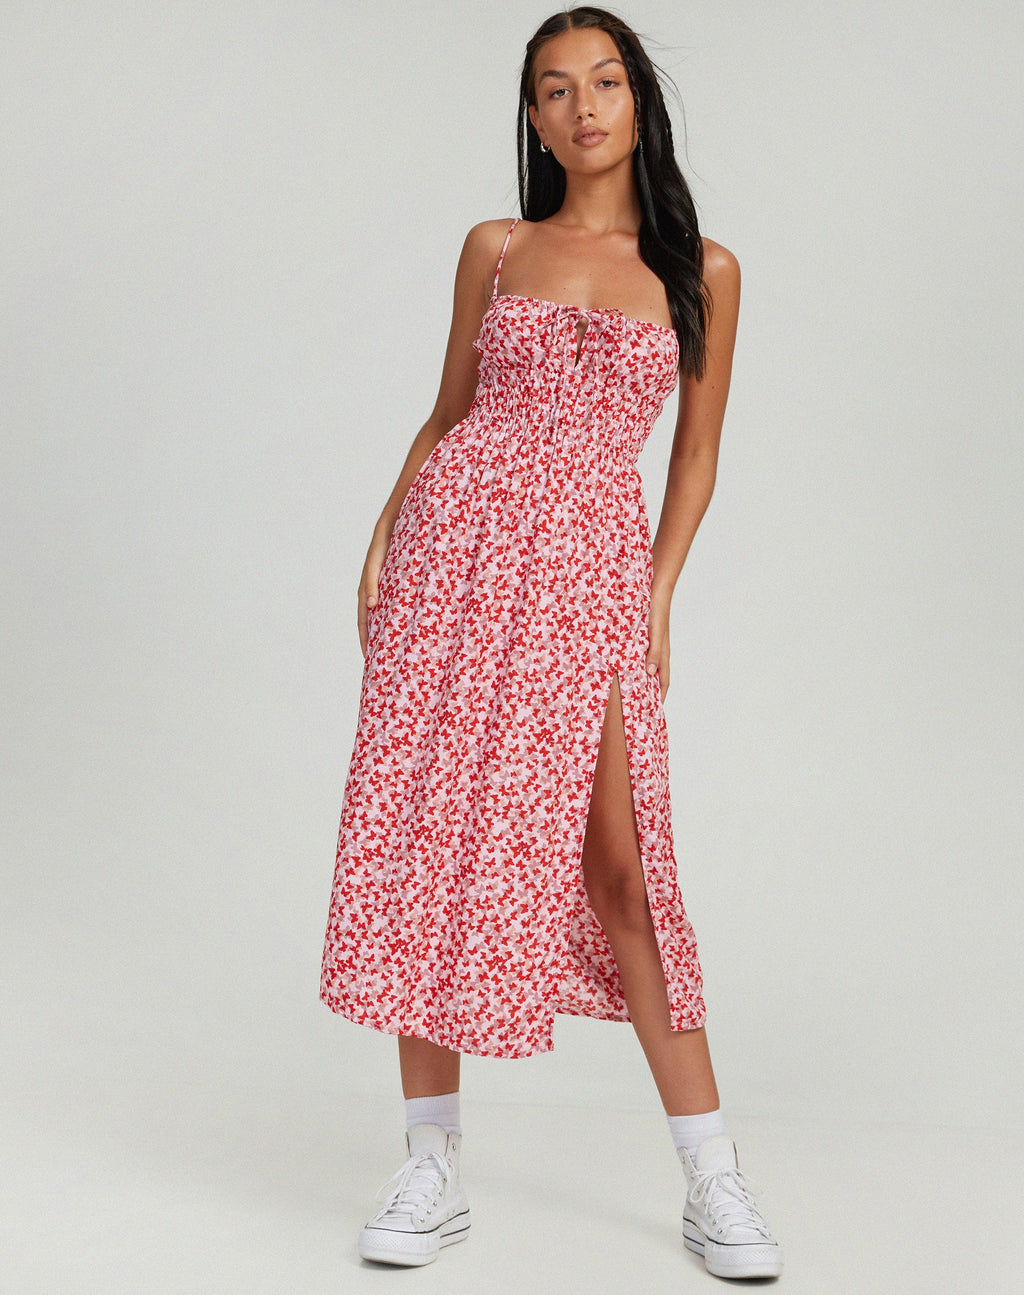 Jeyro Midi Dress in Ditsy Butterfly Peach and Red